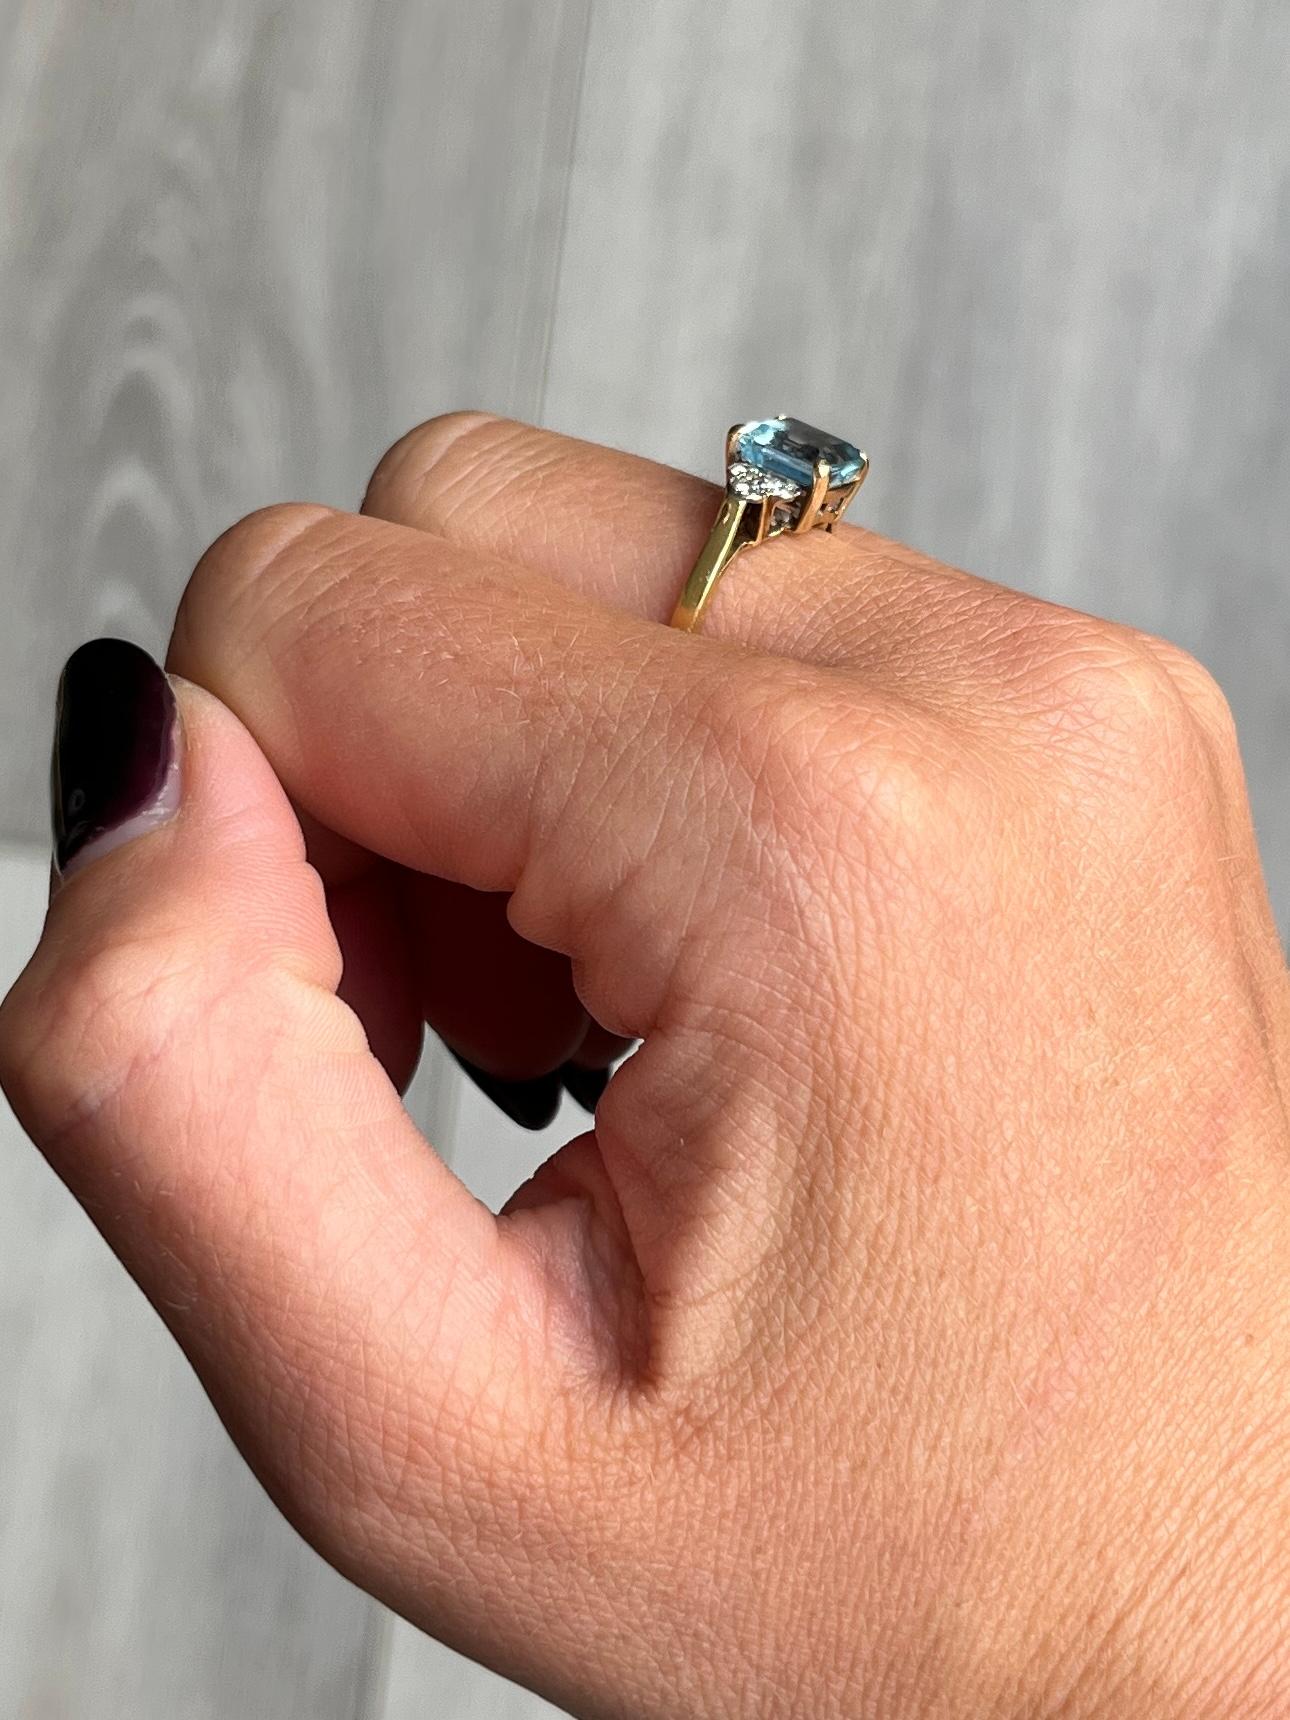 Set in a simple setting modelled in 18carat gold this aquamarine stone measures 1.1ct. Either side of the stone are diamonds which total 30pts. The ring is modelled in 18ct gold and diamonds set in platinum.

Ring Size: M 1/2 or 6 1/2
Stone